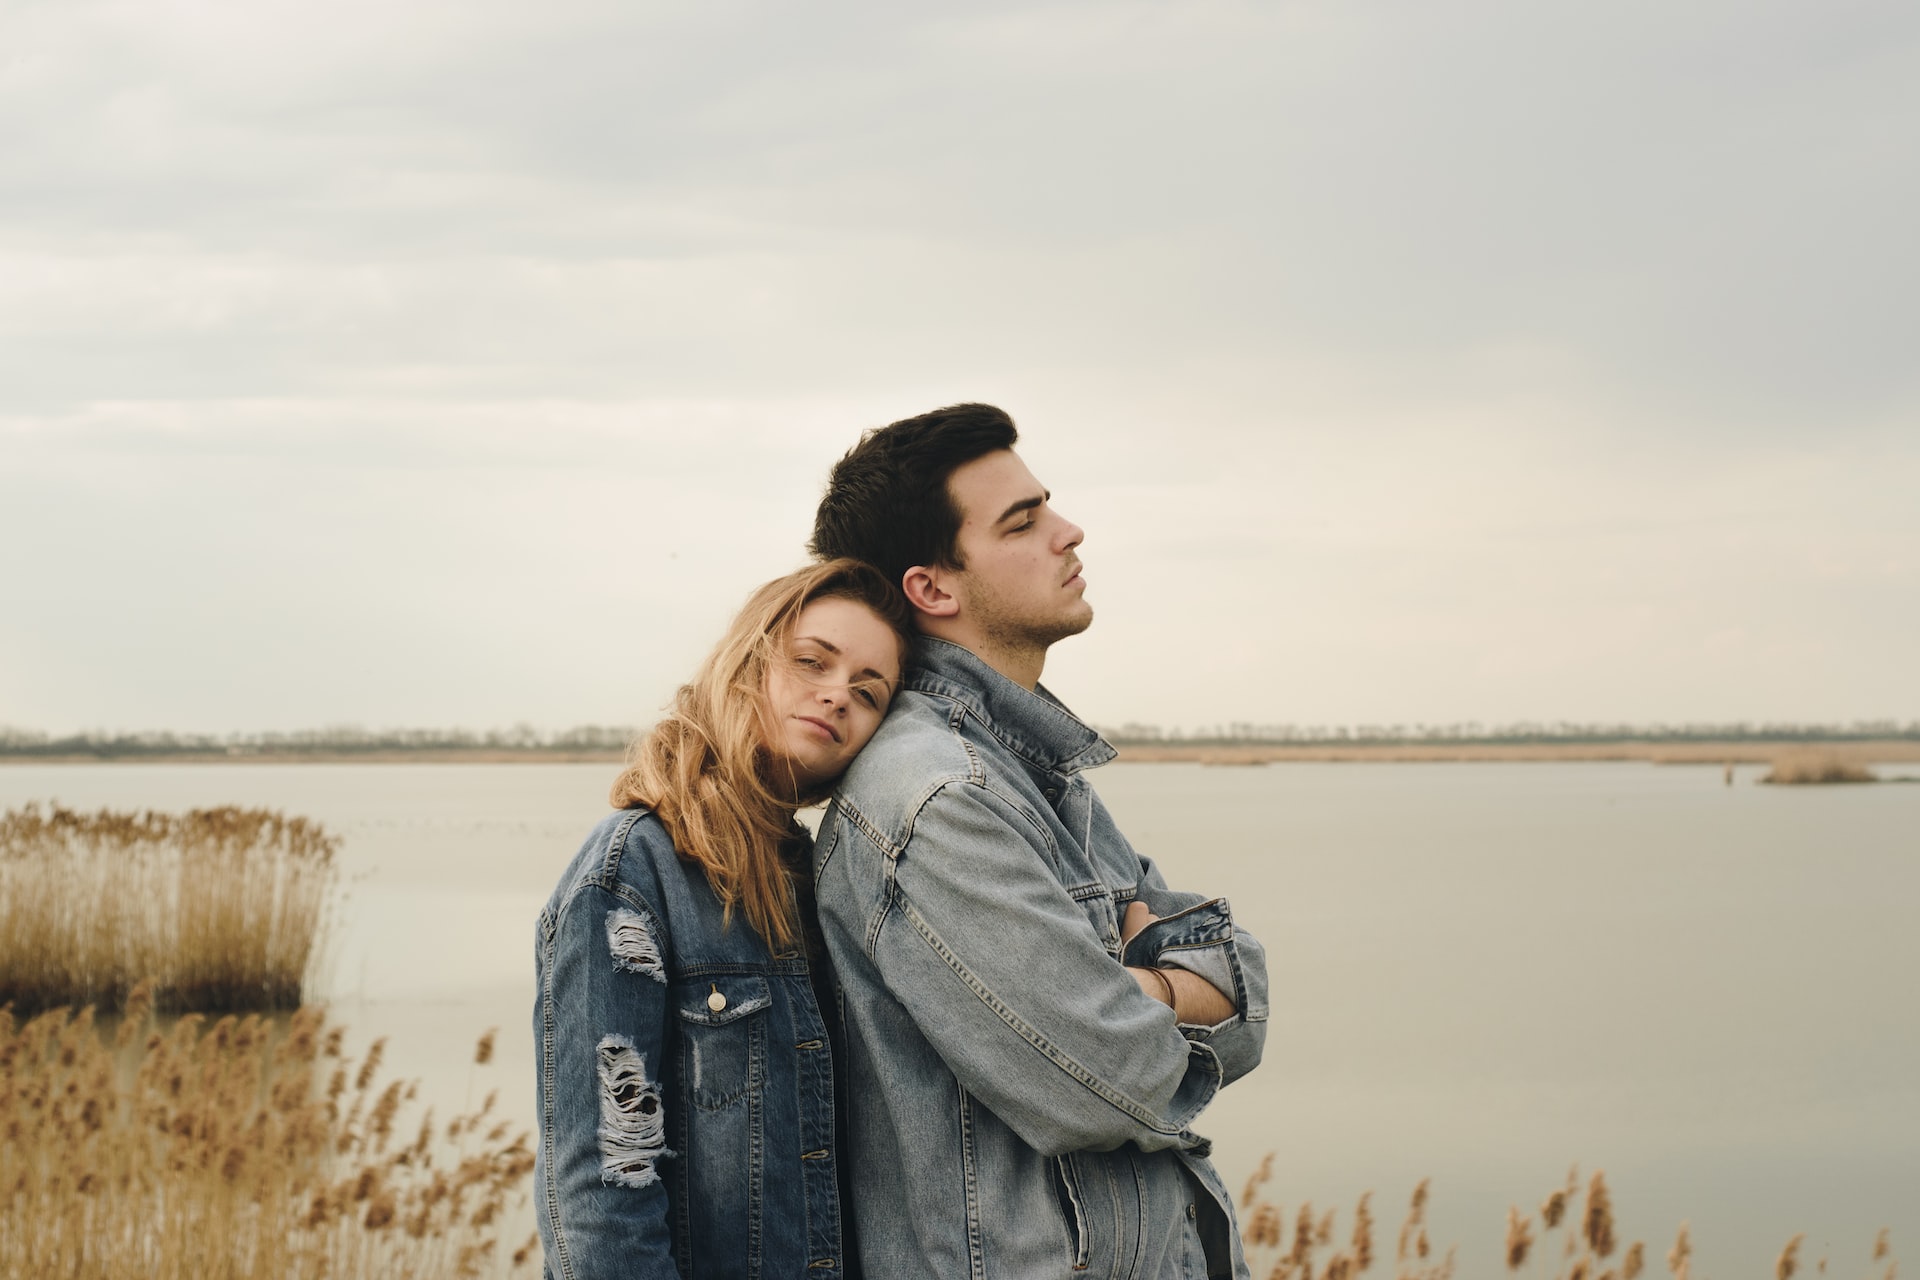 Fix a Relationship from Failing with These Round-up of Helpful Tips